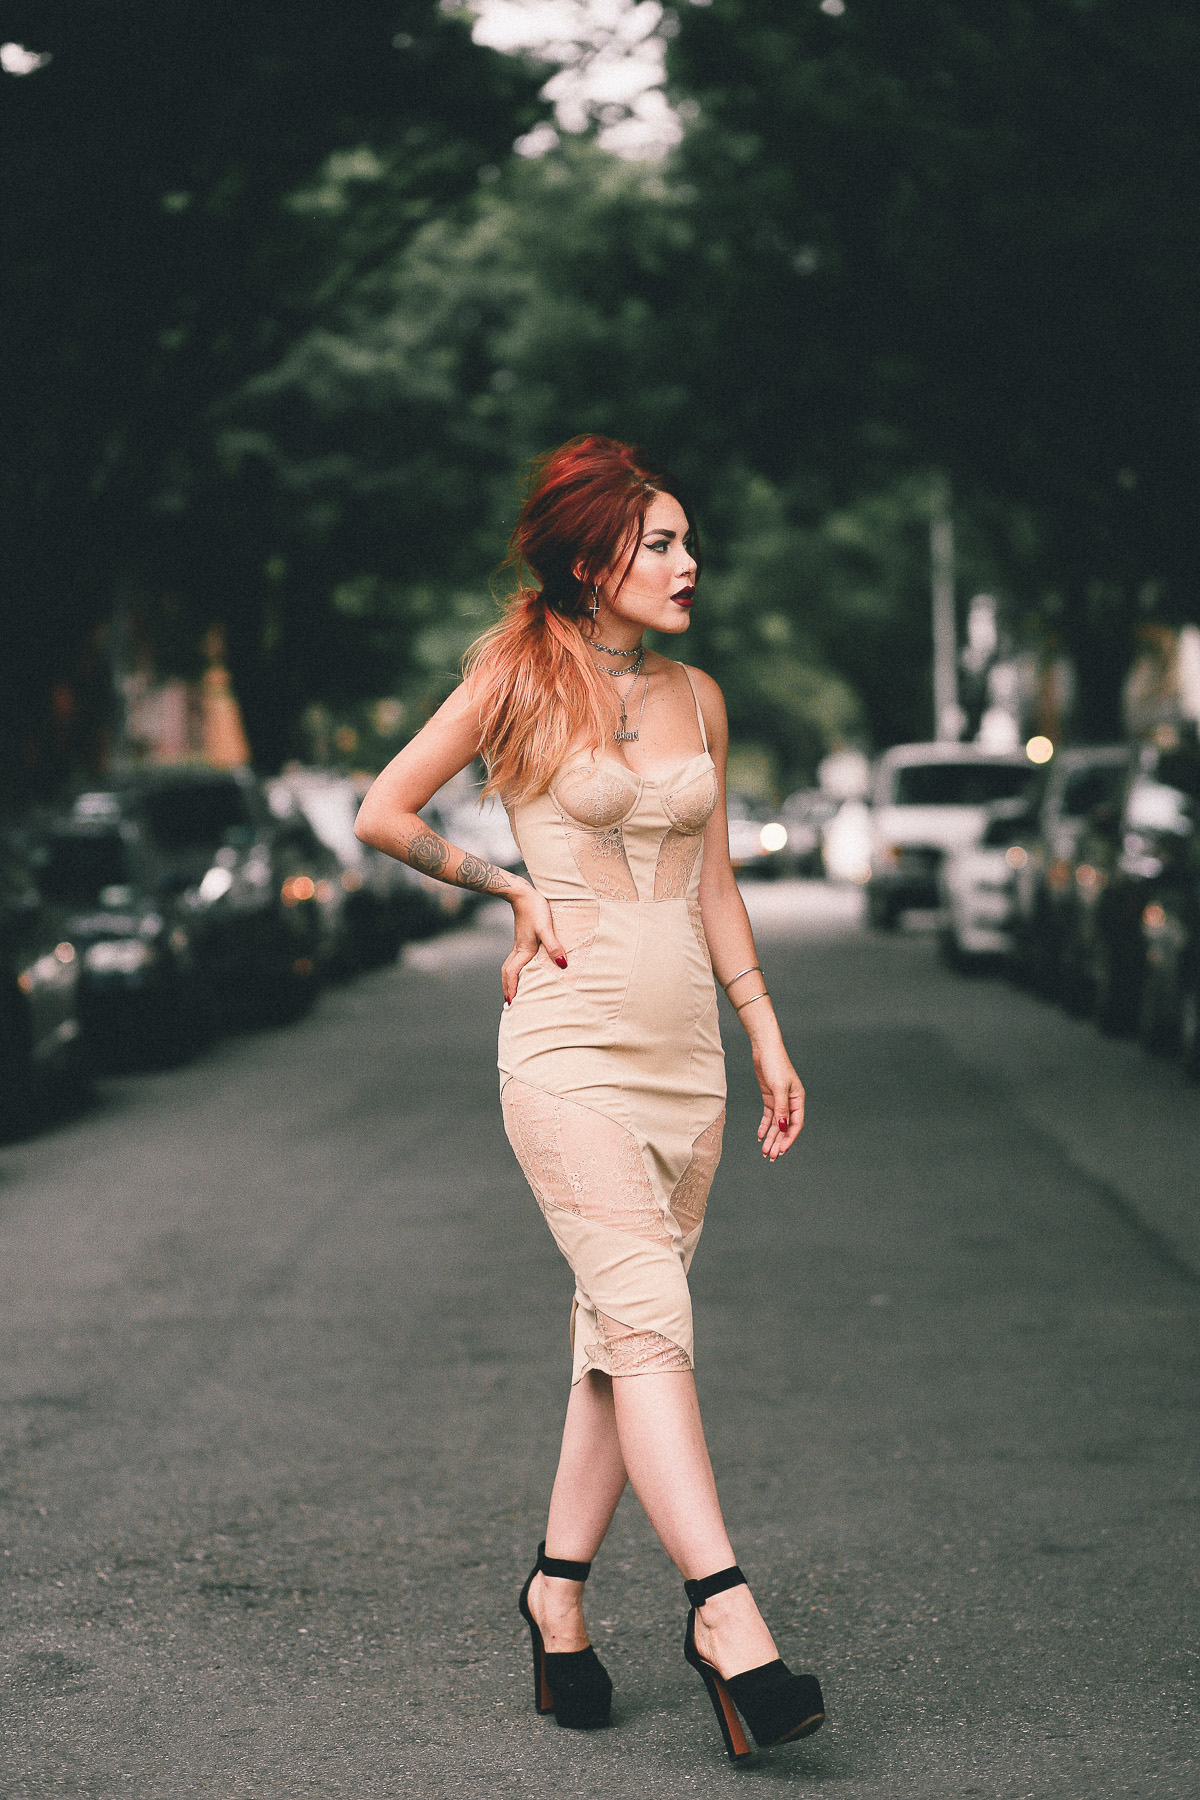 Luanna of Le Happy wearing Alaia sandals and House of CB dress